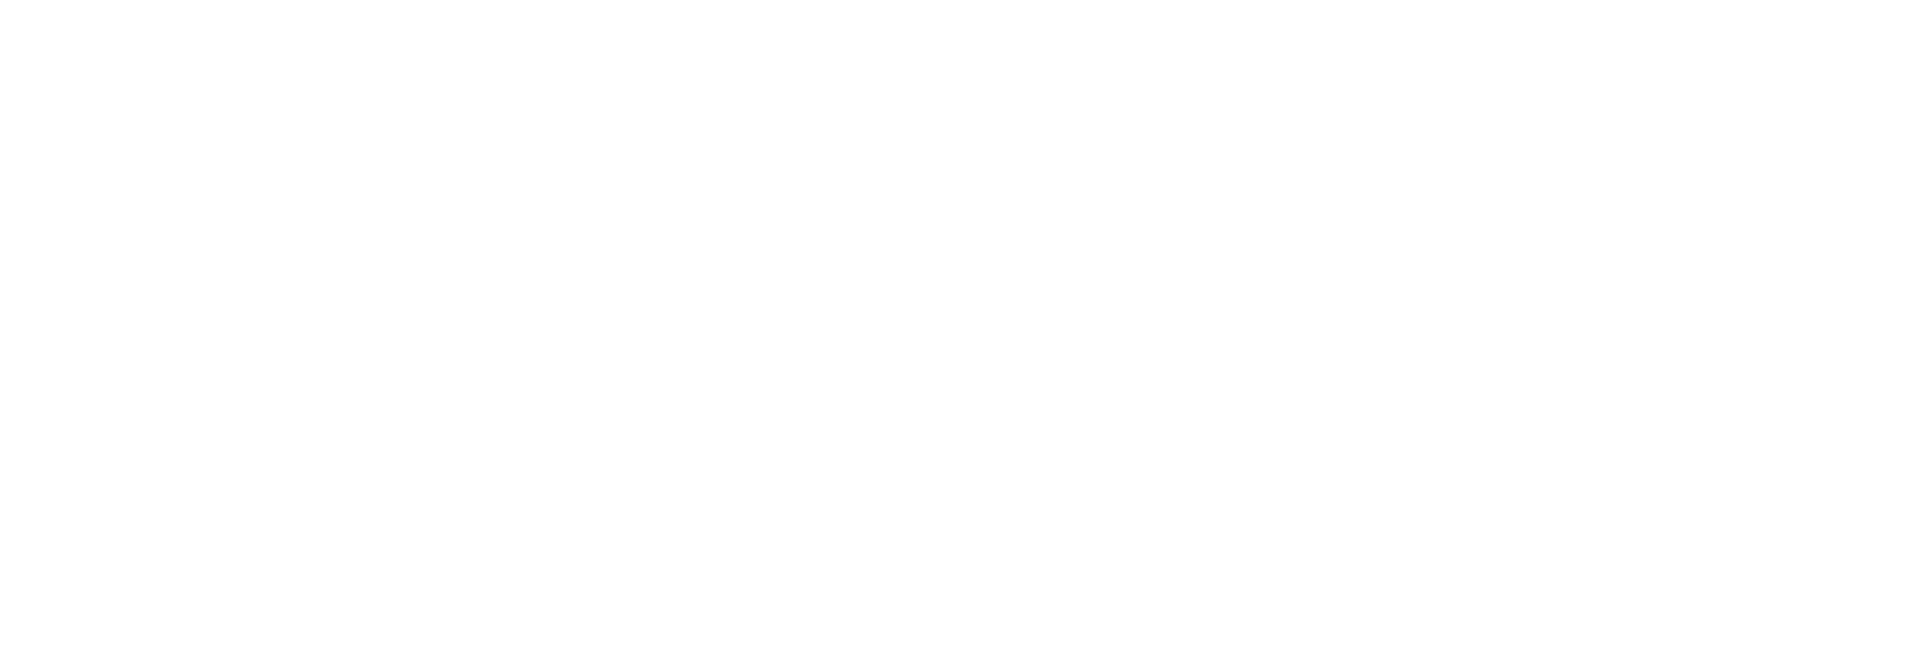 Fort Collins Periodontics and Dental Implants white logo